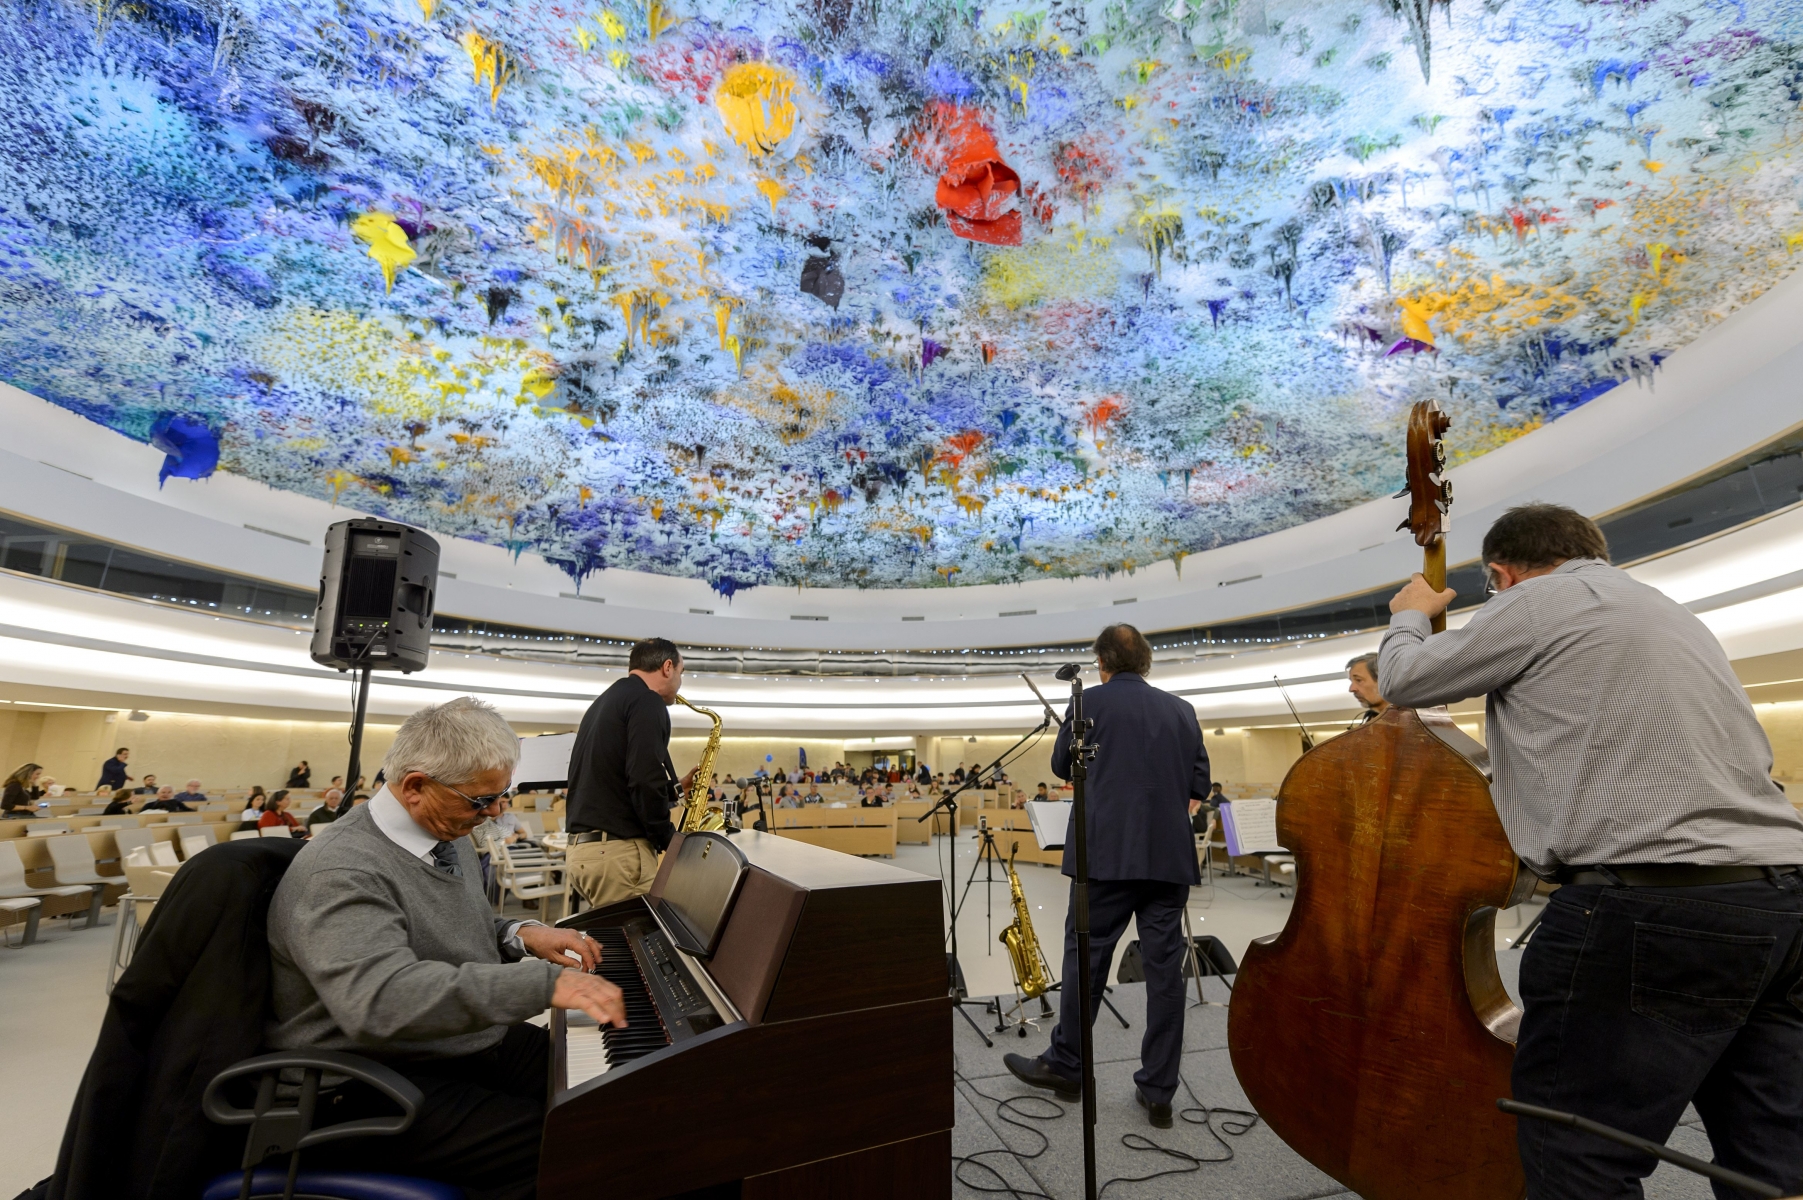 People visit the European headquarters of the United Nations during the Open Day and the UN70 celebrations at the European headquarters of the United Nations, in Geneva, Switzerland, on Saturday, October 24, 2015. The event is organized as part of the UNÄôs 70th anniversary. (KEYSTONE/Martial Trezzini)